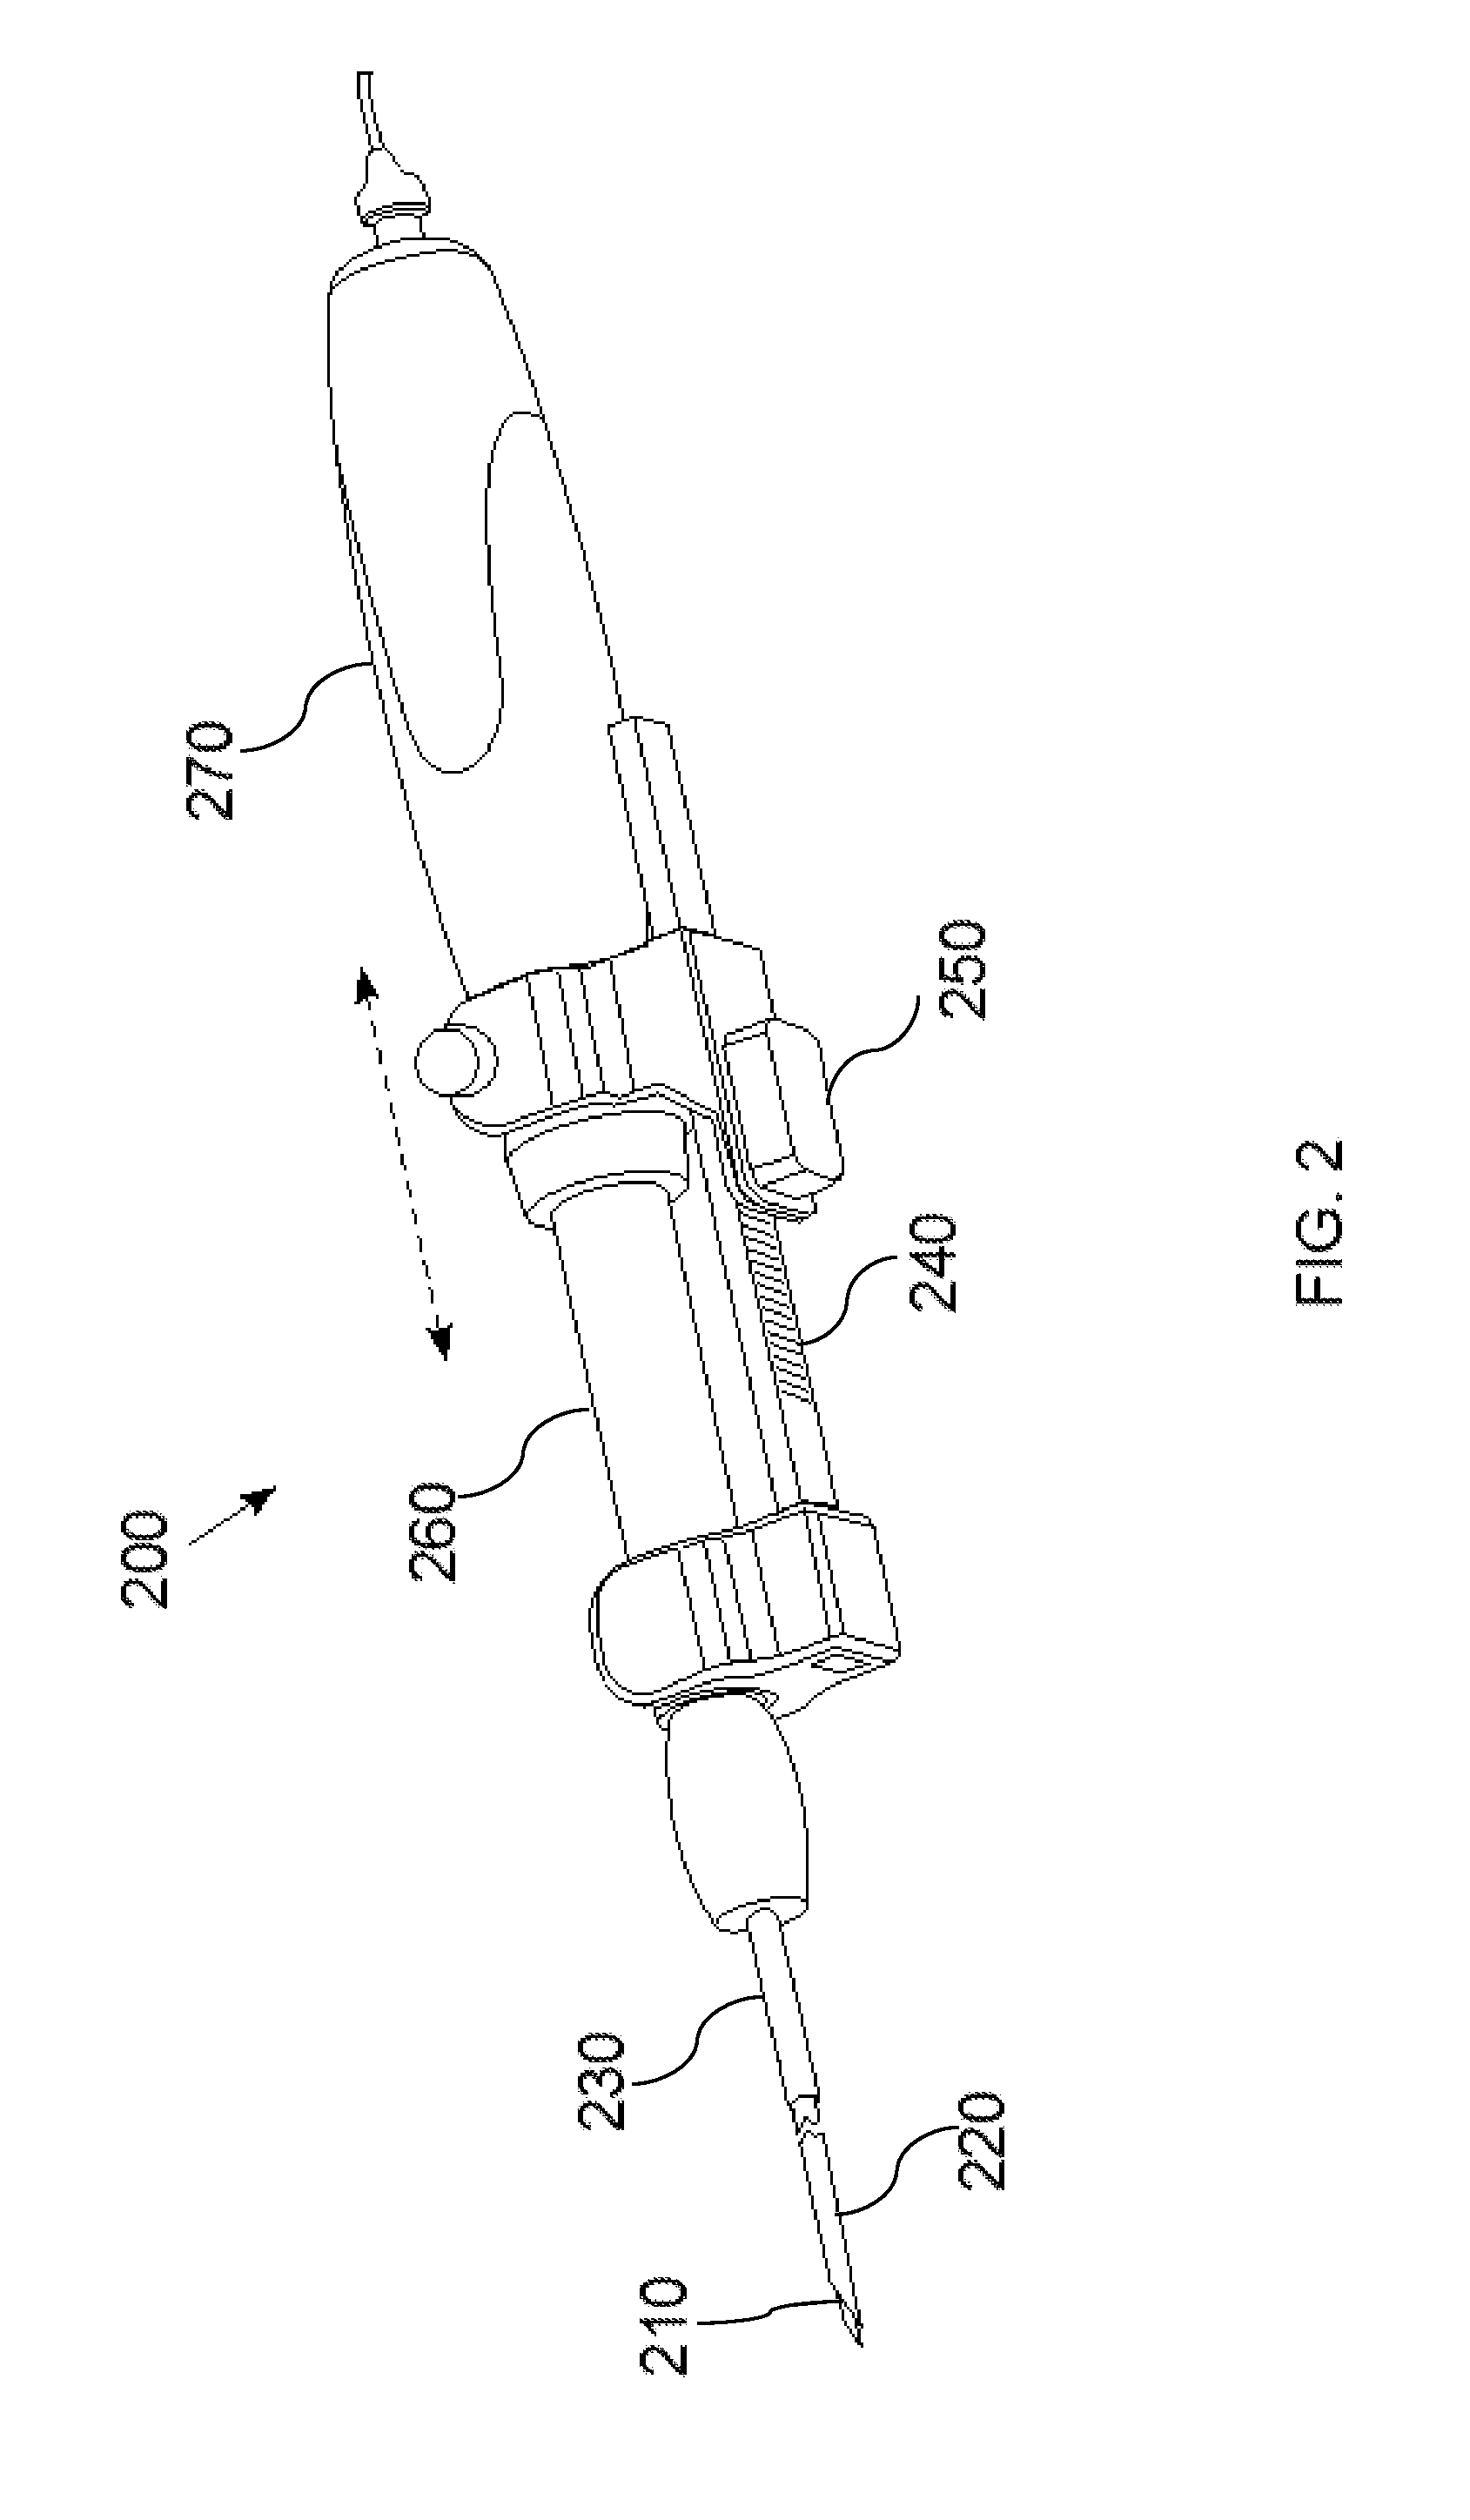 Apparatus and Method for Assessment of Interstitial Tissue